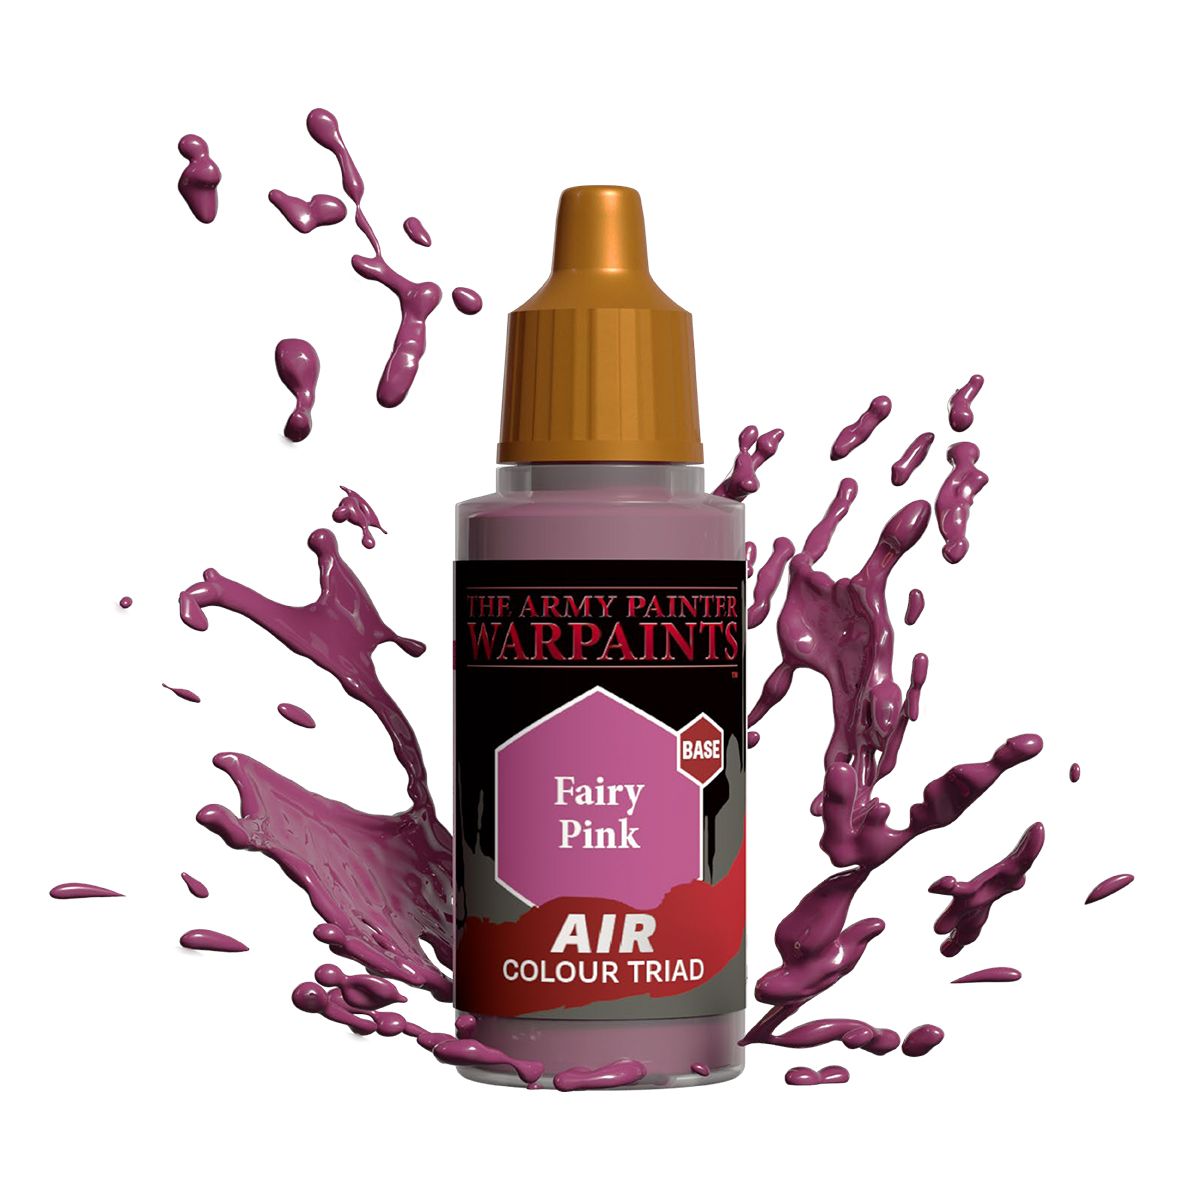 Army Painter Warpaints - Air Fairy Pink Acrylic Paint 18ml